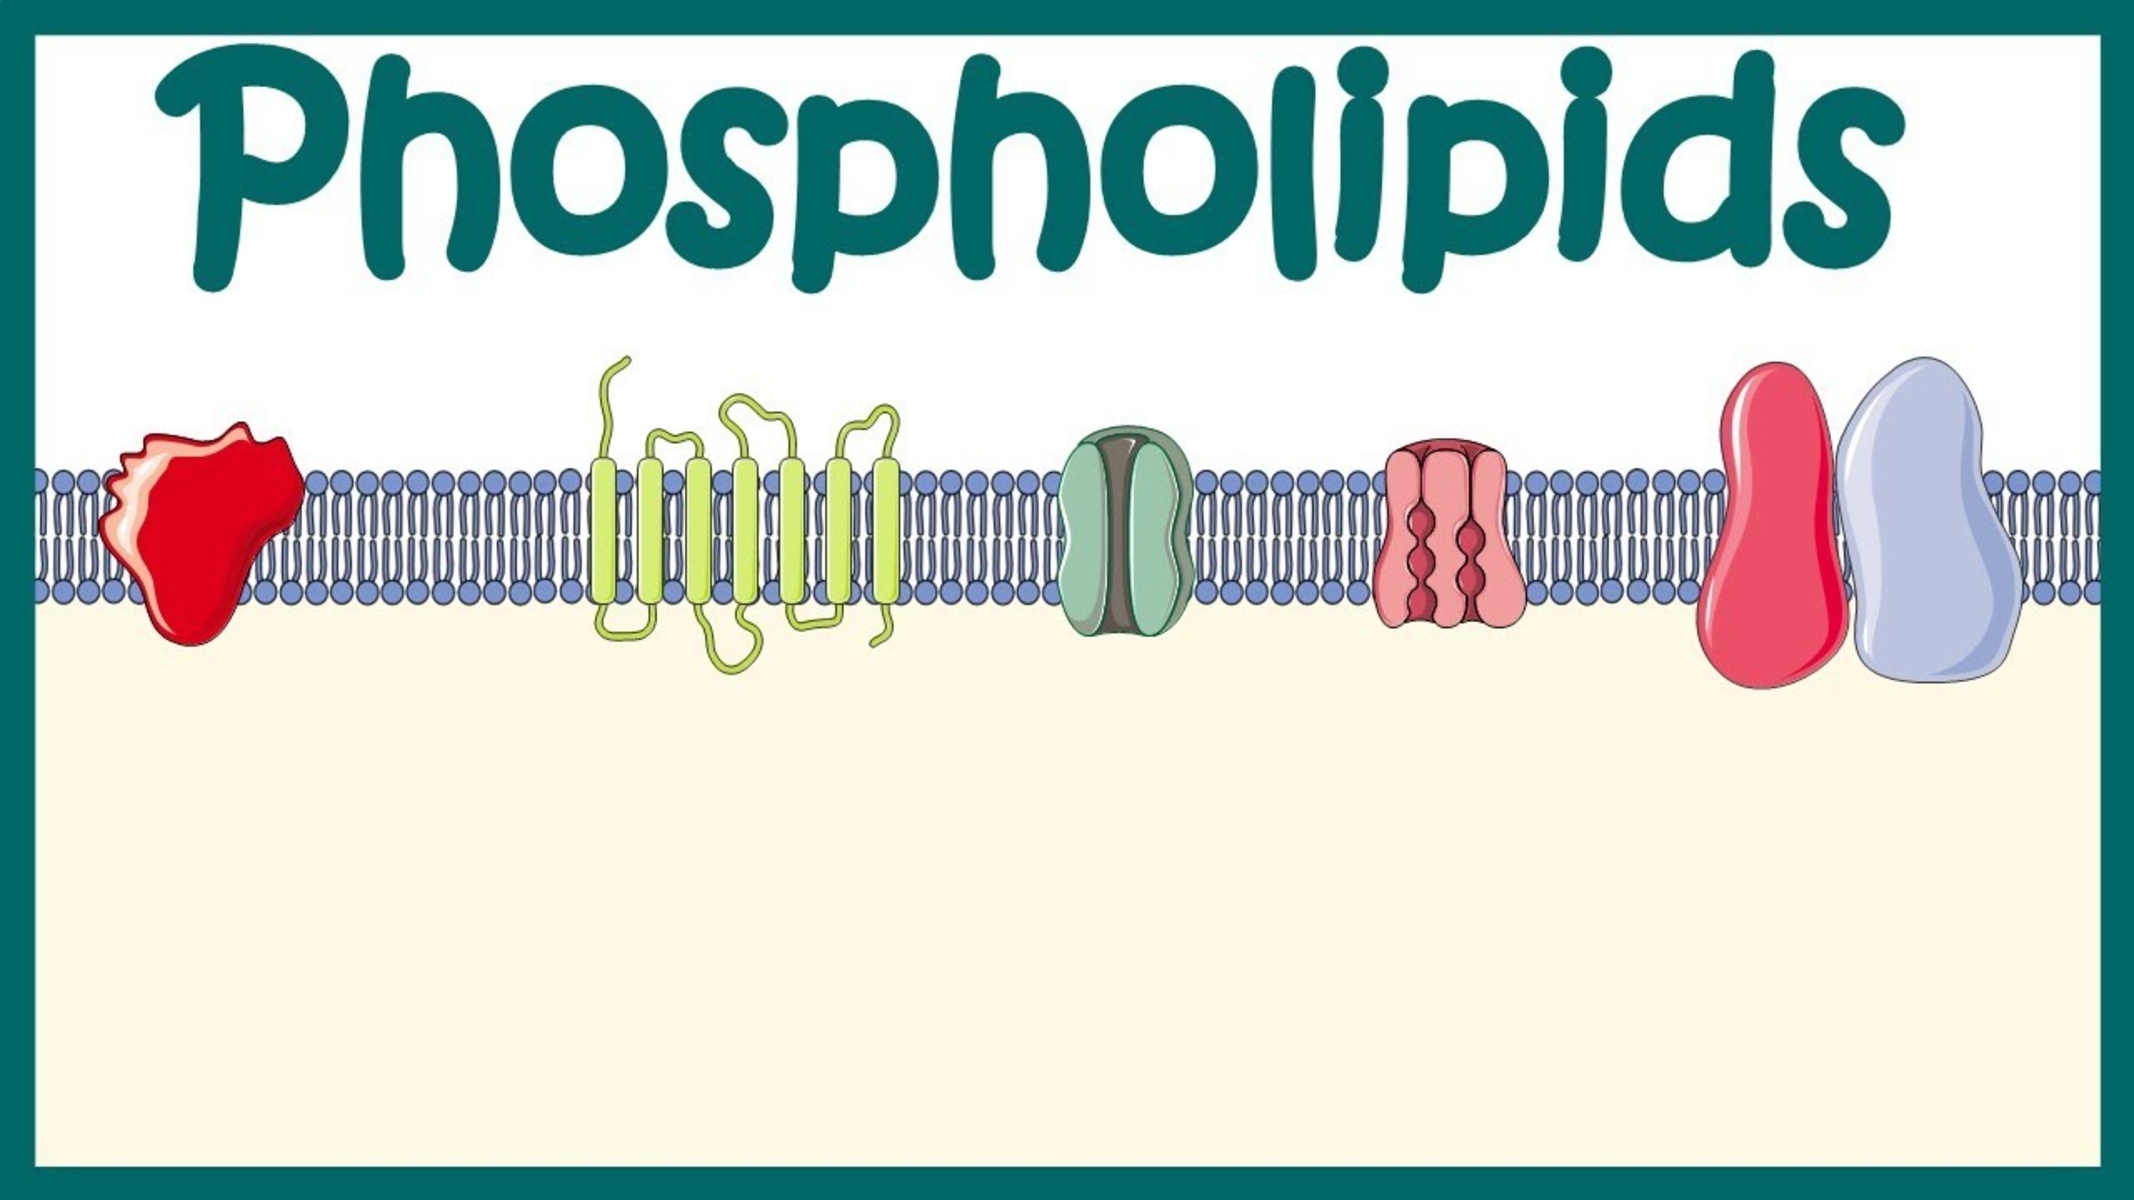 8-extraordinary-facts-about-phospholipids